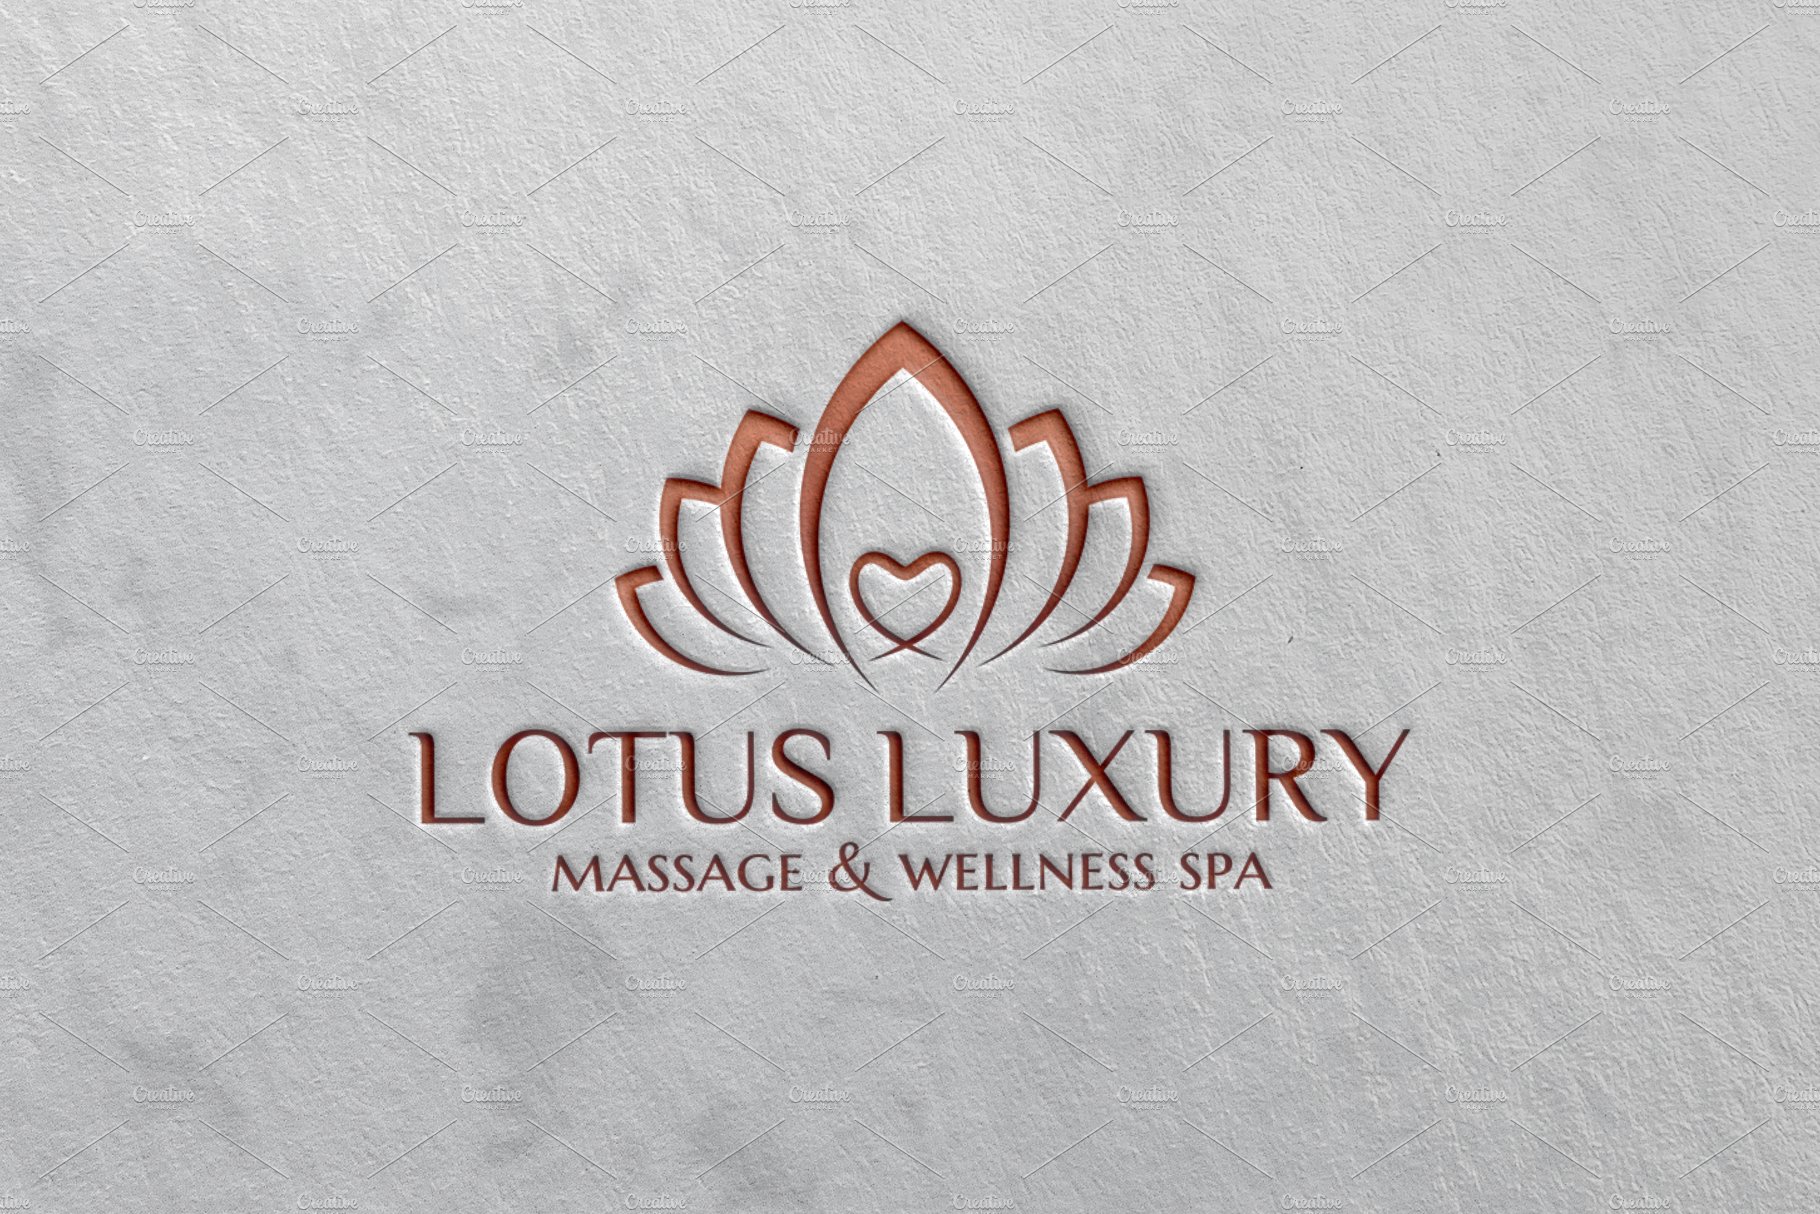 Lotus Luxury | Spa and Wellness Logo cover image.